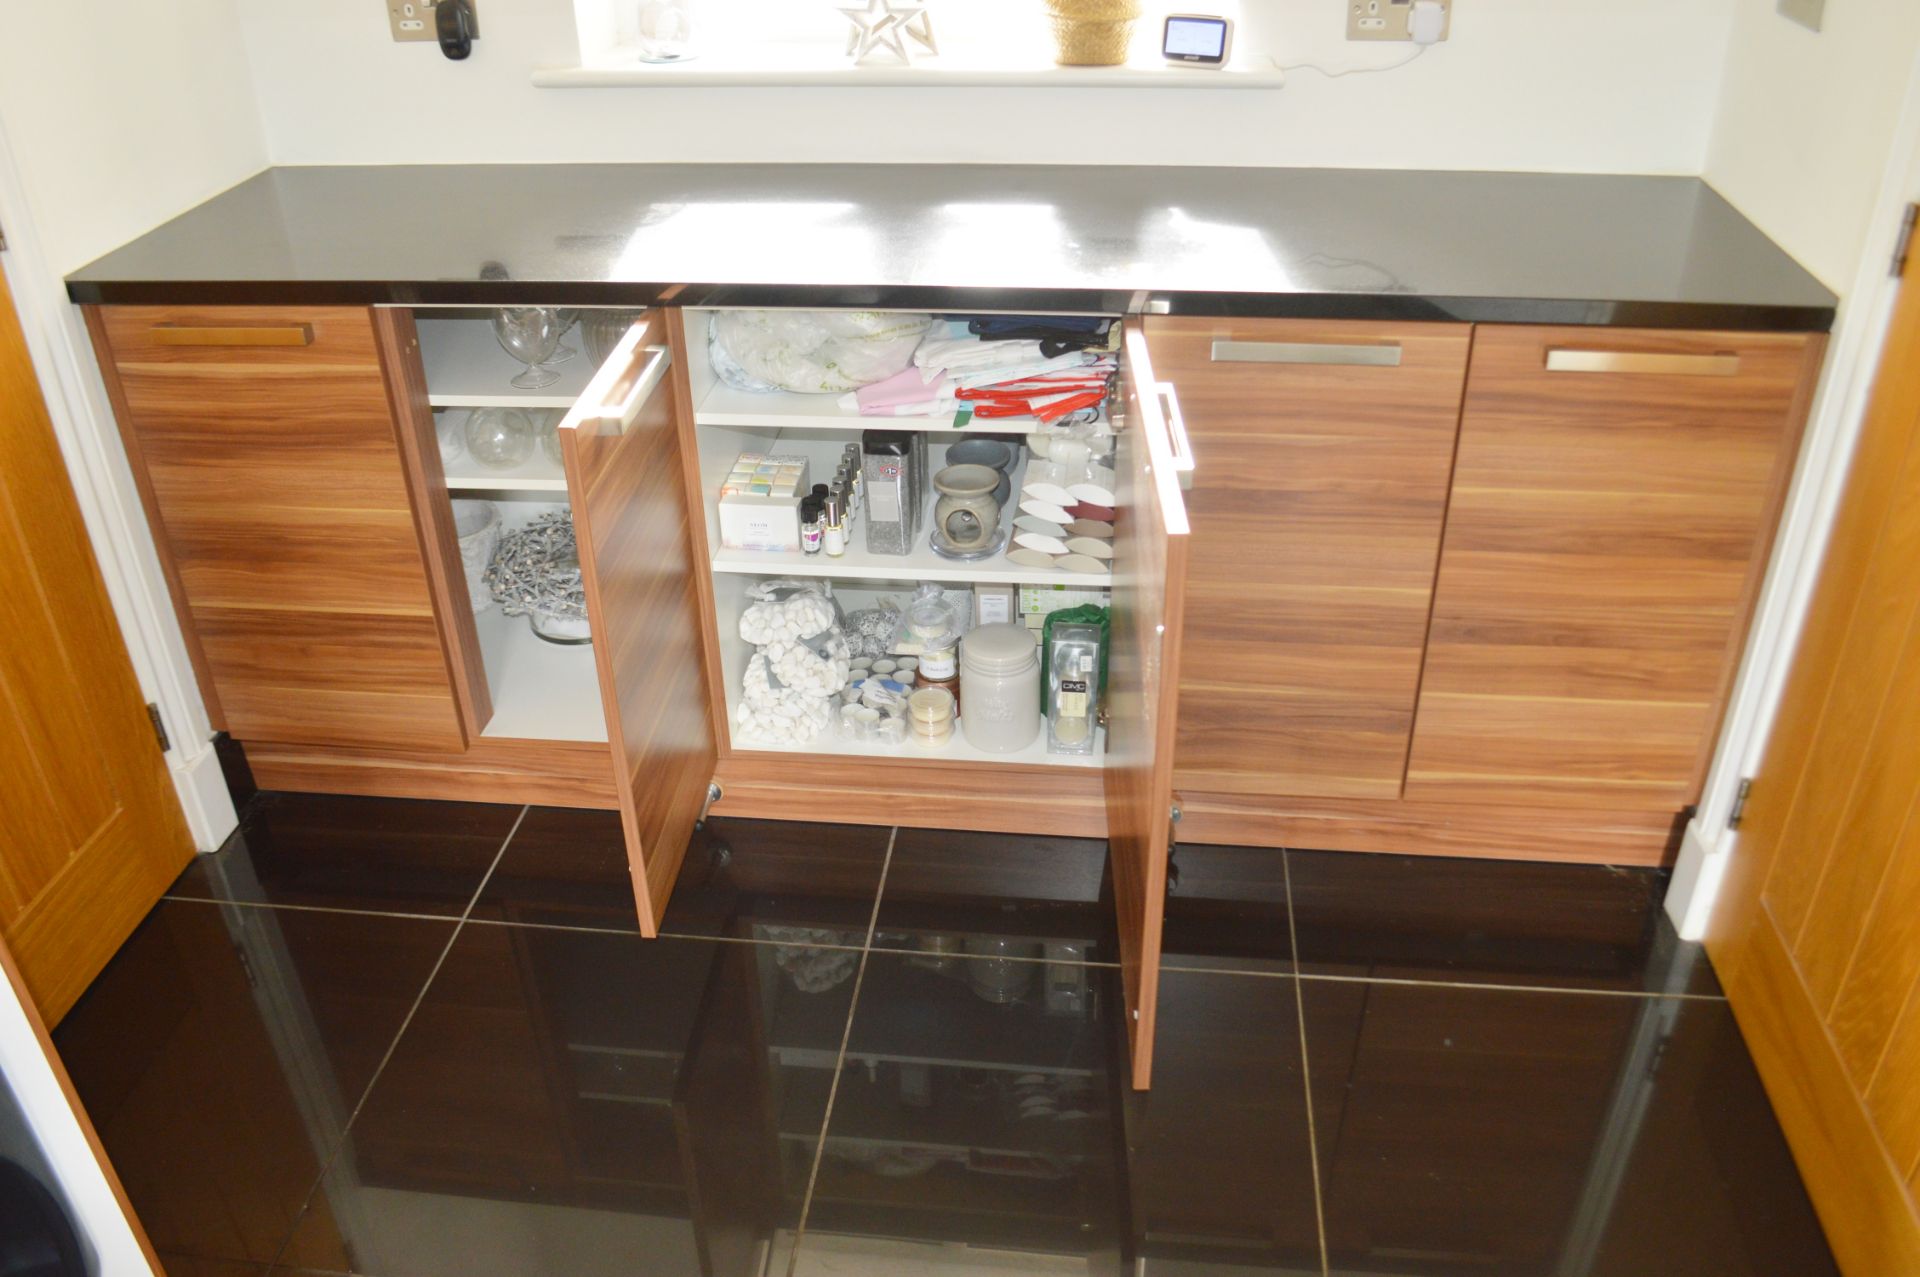 1 x Contemporary Bespoke Fitted Kitchen With Neff Branded Appliances - Collection Date: 1st November - Image 3 of 52